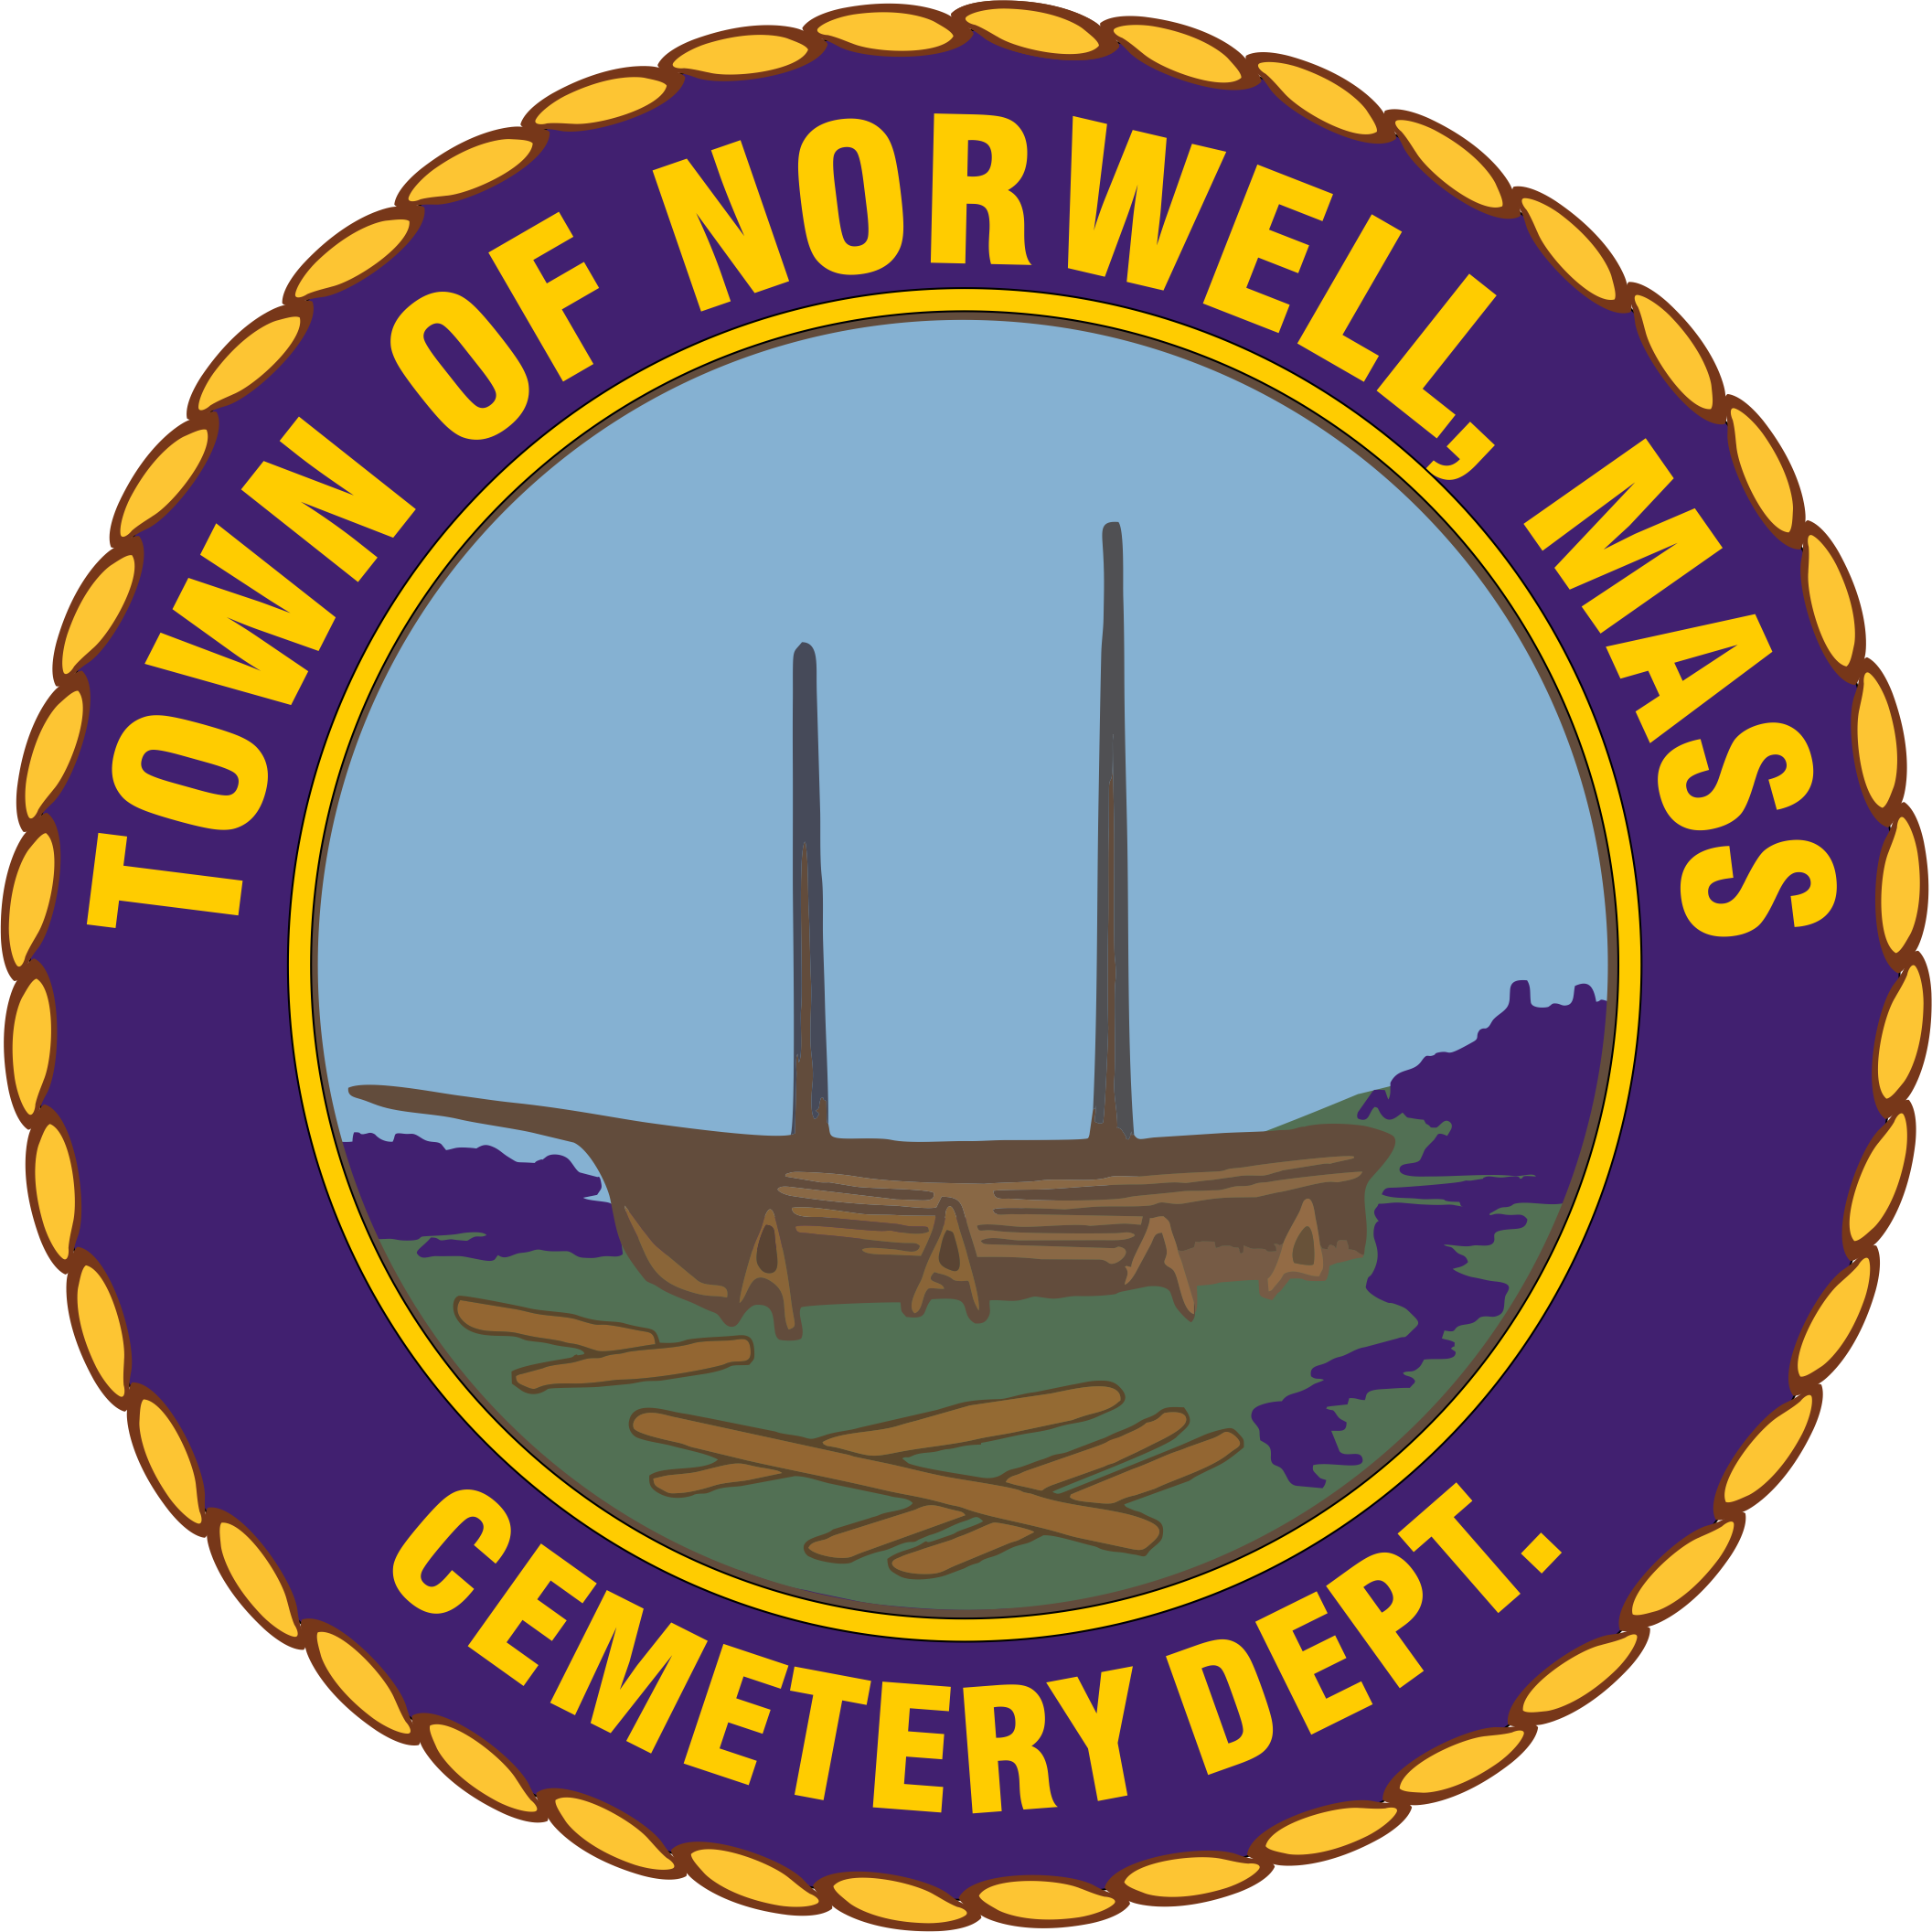 Town of Norwell Mass Cemetery Division